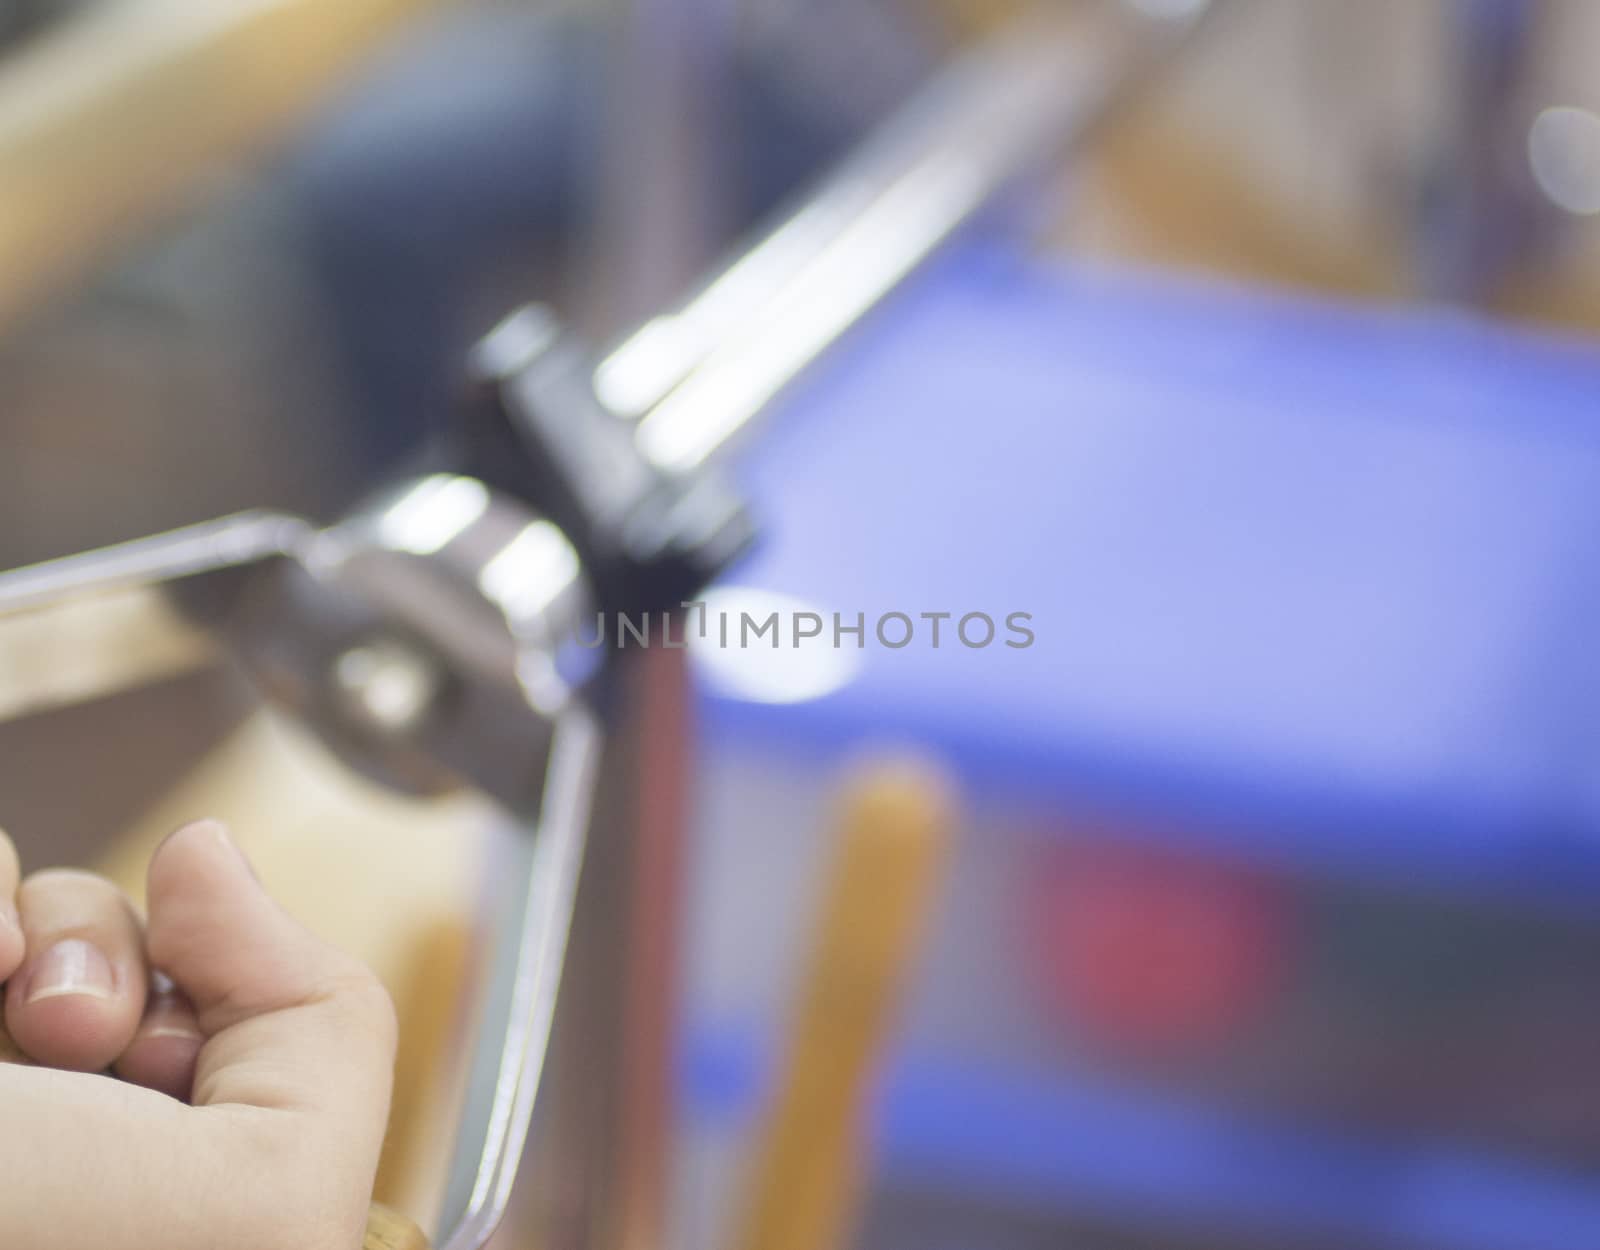 Close-up photo of hand of a male patient in physiotherapy rehabilitation treatment from orthopedic surgery in a hospital clinic physiotherapy room turning a wheel to build strength in his wrist and forearm muscles.